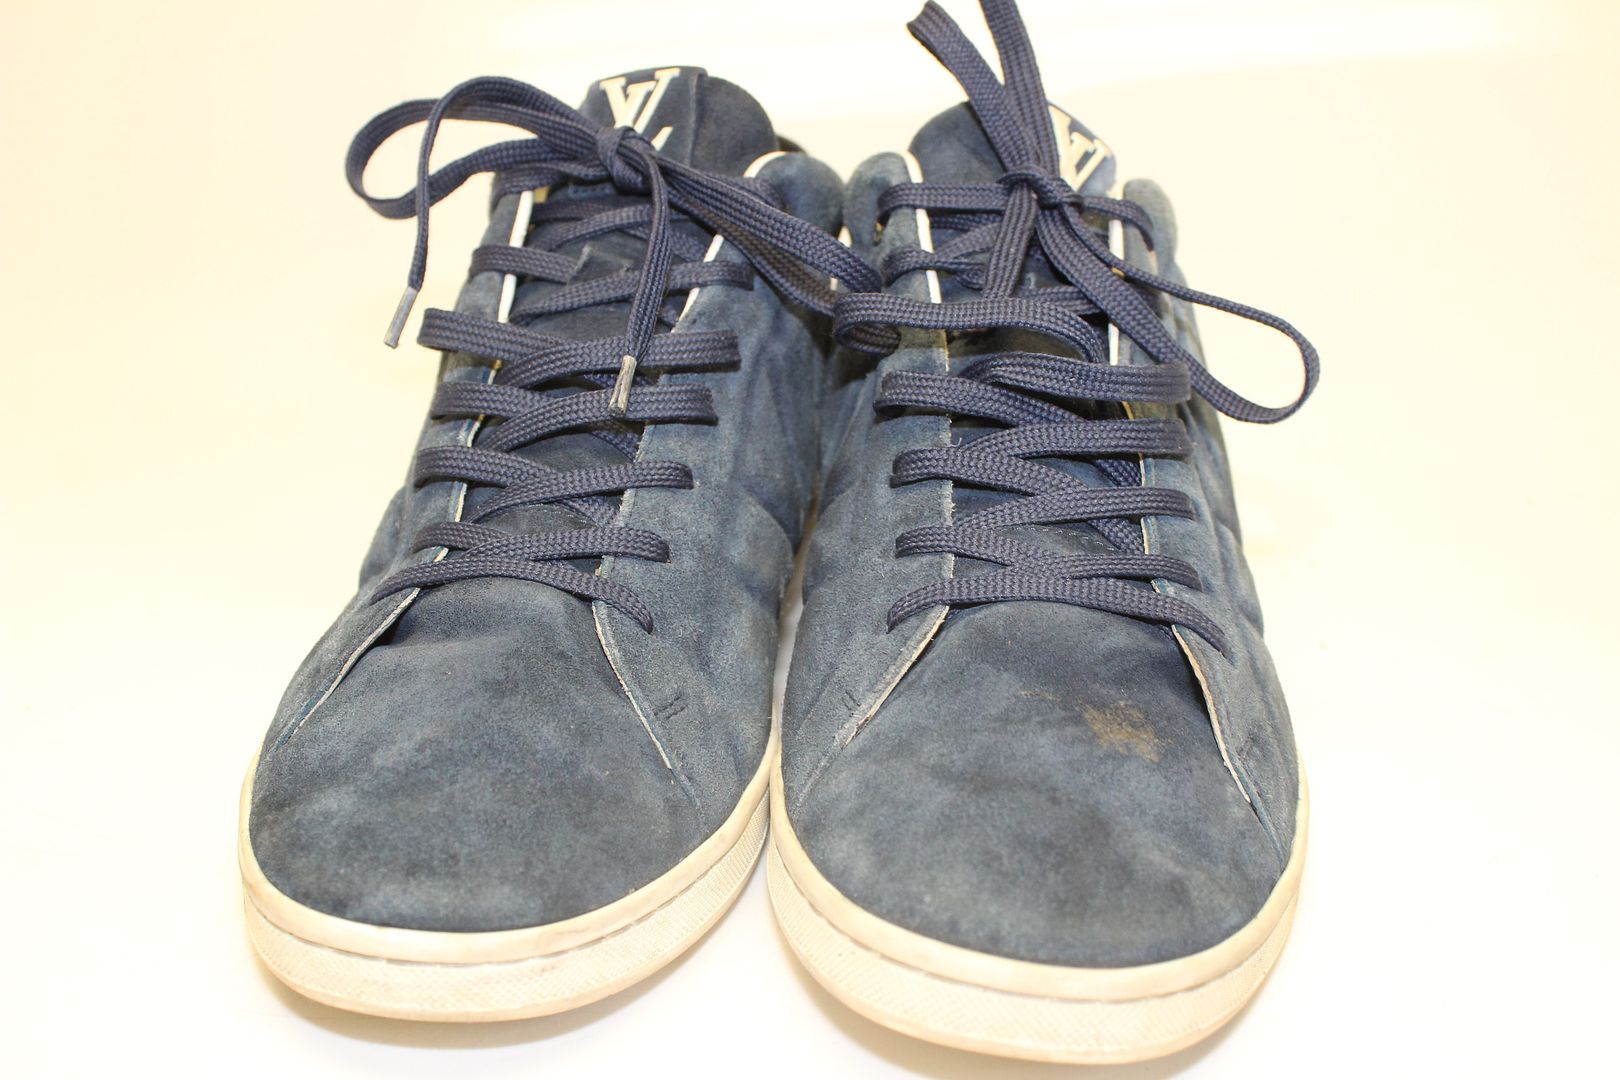 Louis Vuitton Paris Italy Made Mens UK 7 US 8 Blue Suede Sneakers Shoes MS 1103 | eBay